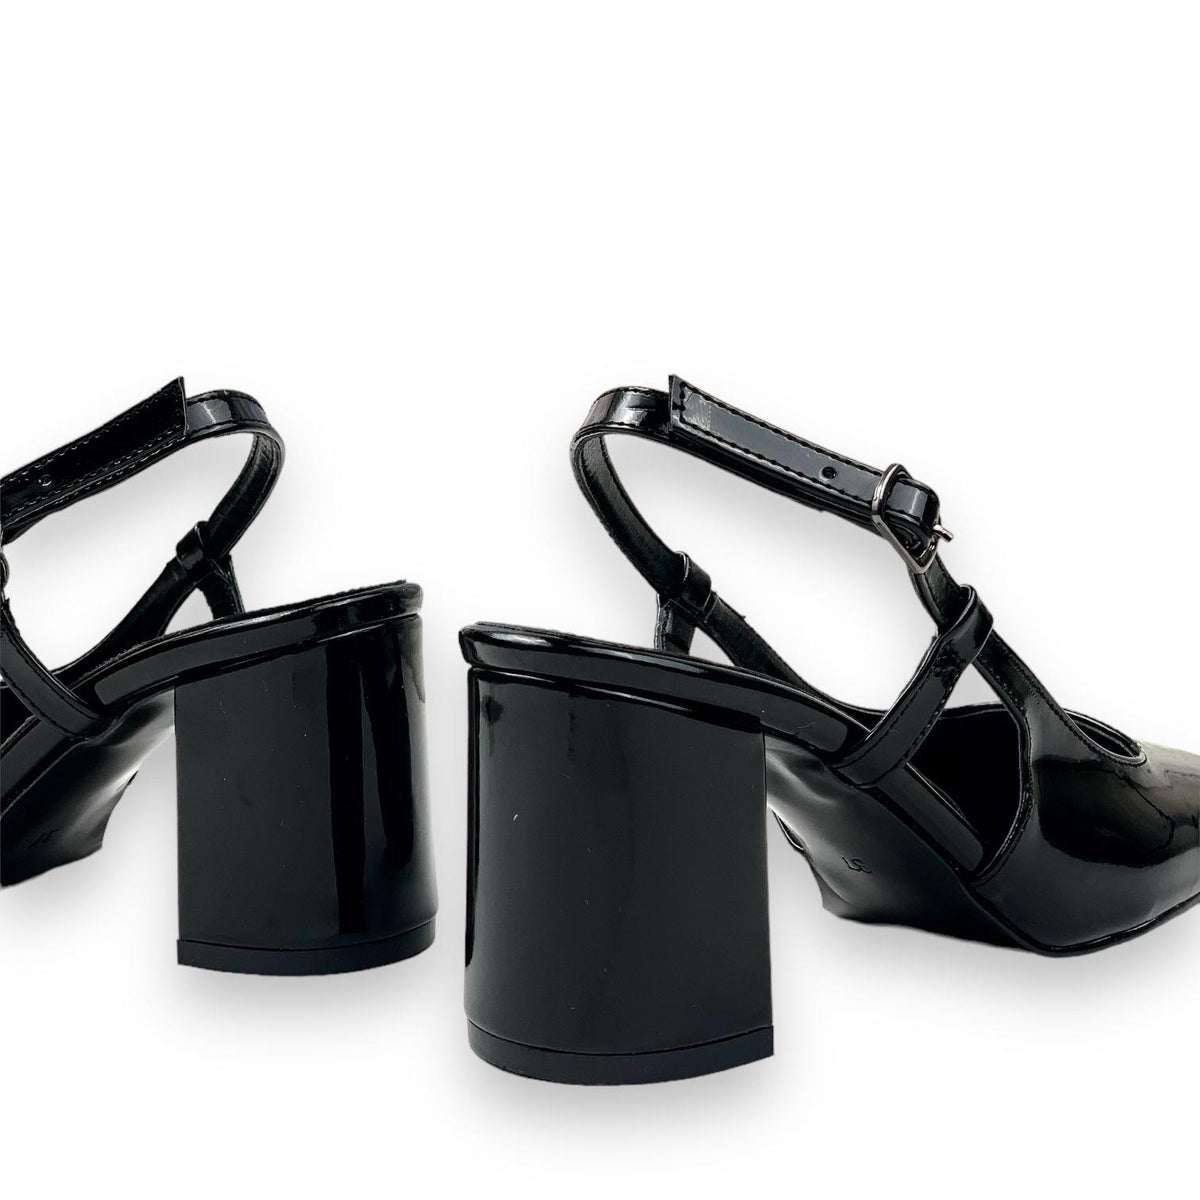 Women's Collar Black Patent Leather Round Toe Open Back Sandals 8 Cm - STREETMODE ™